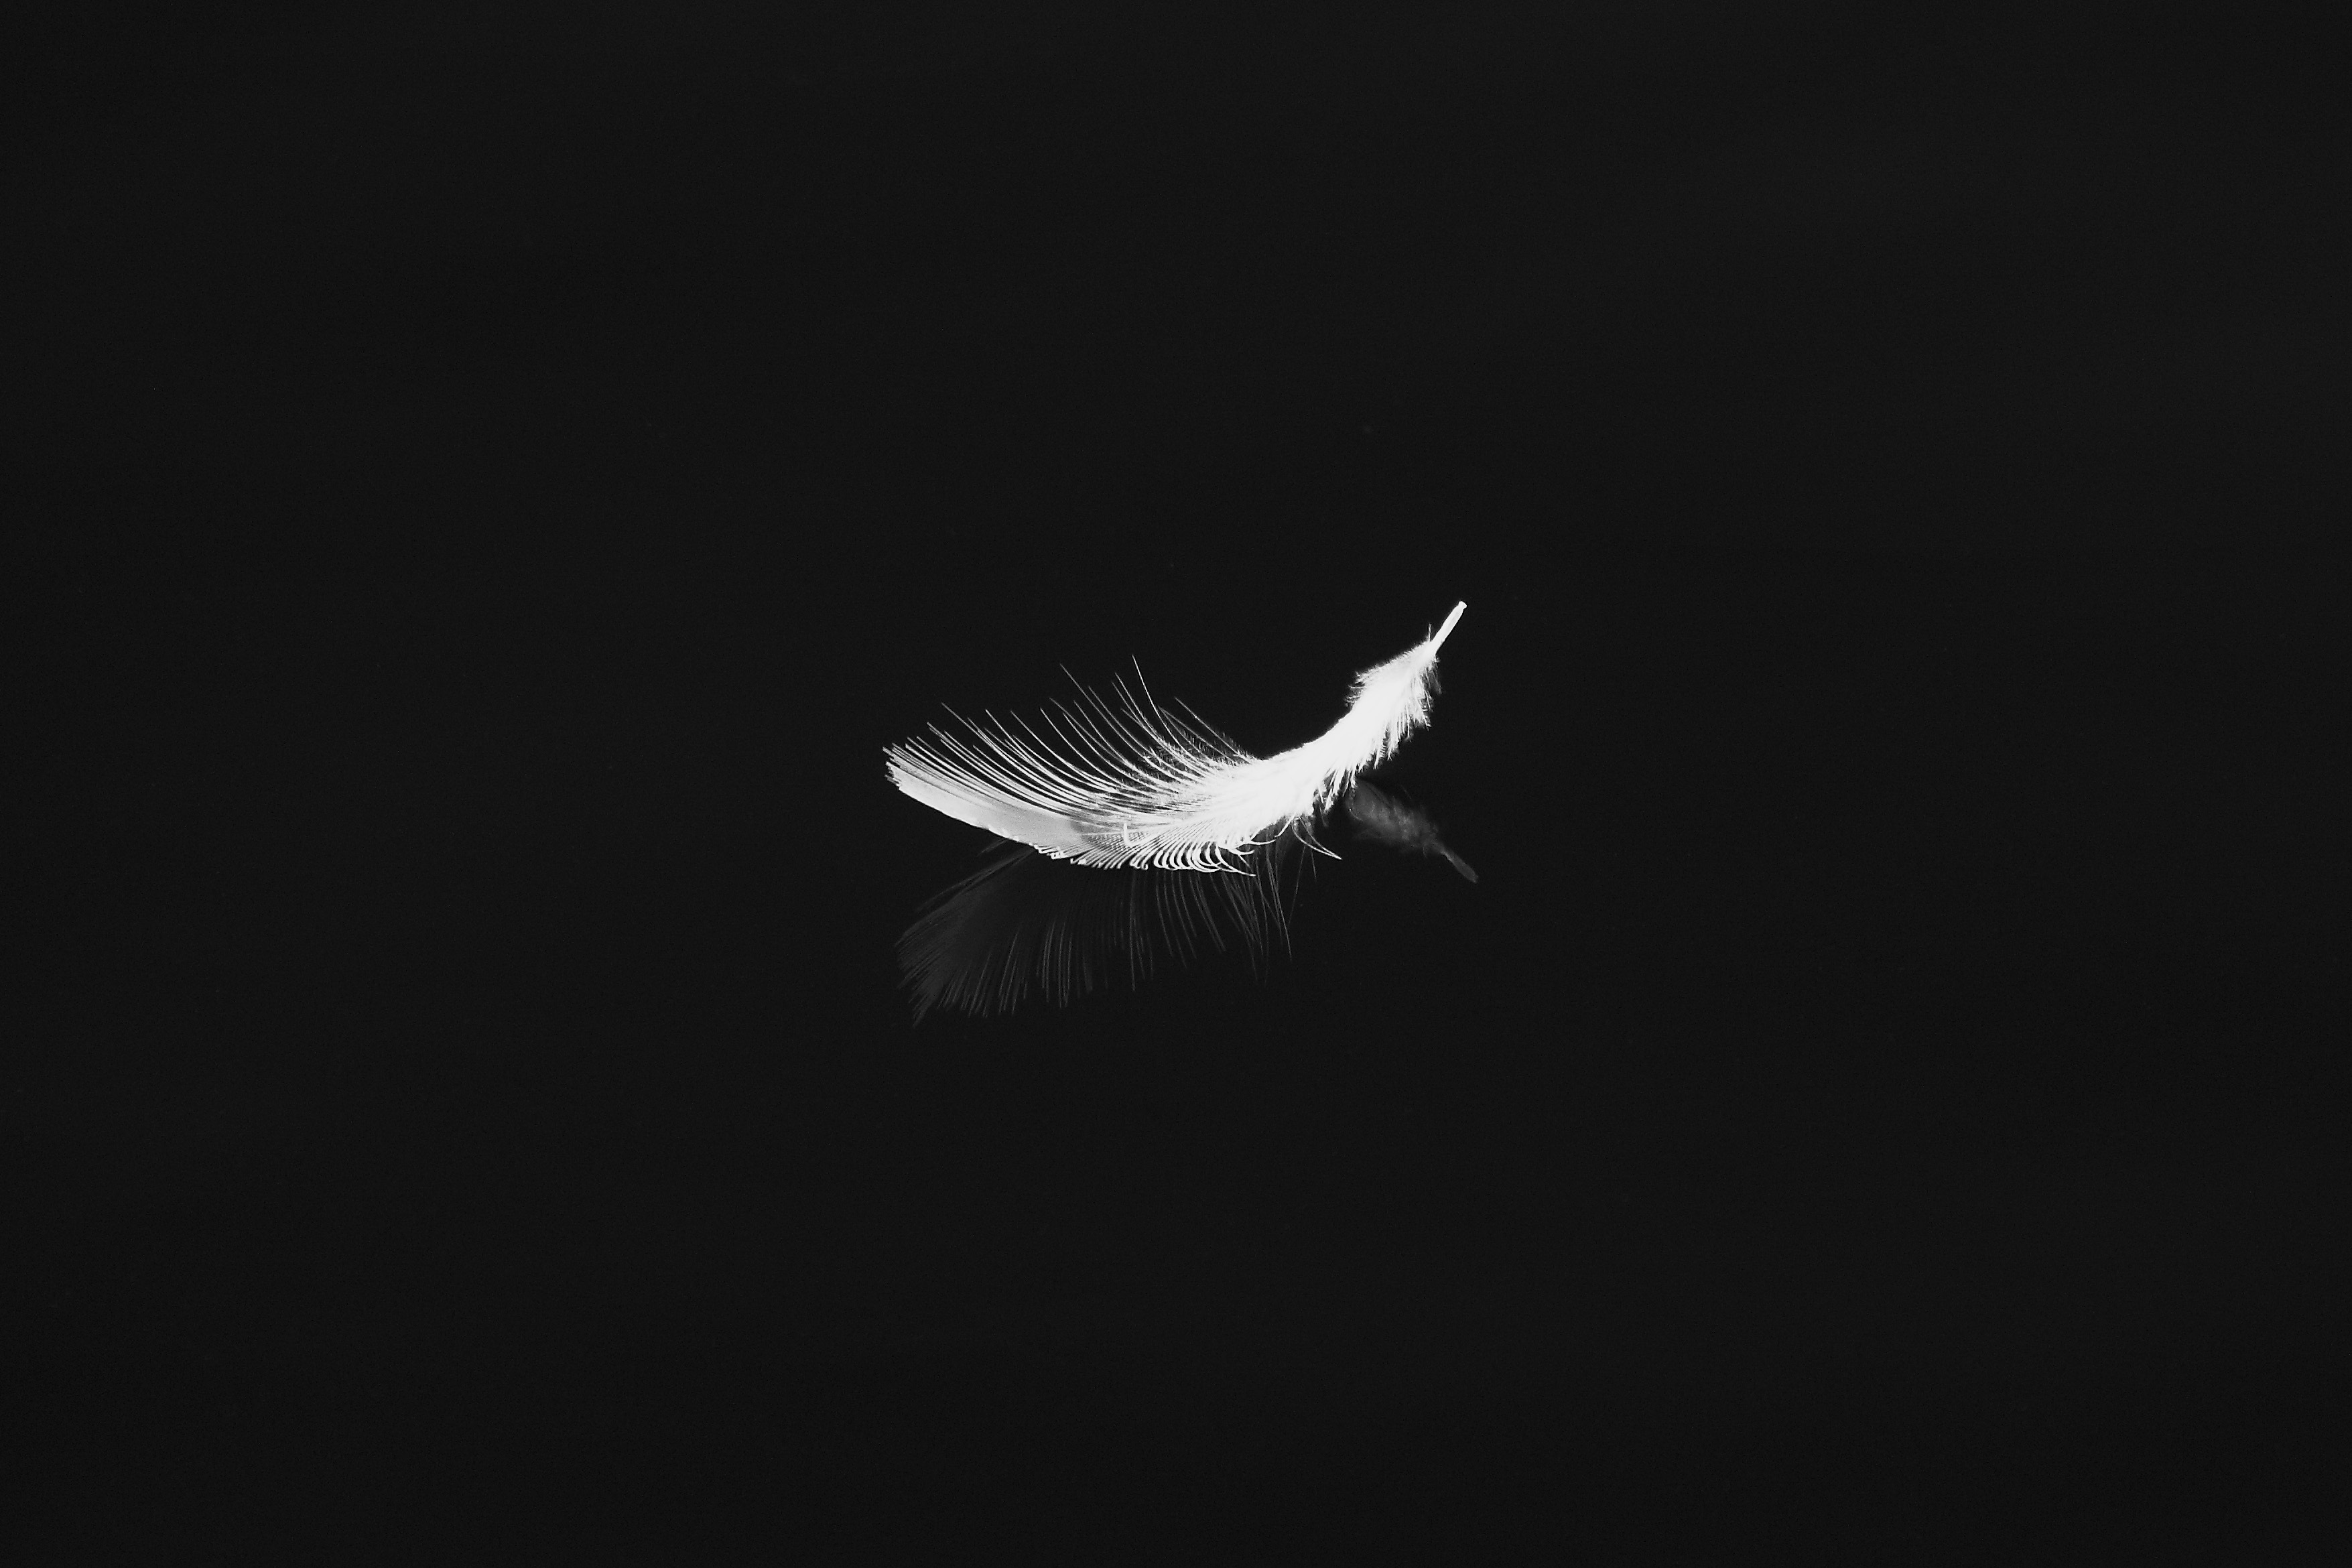 144467 download wallpaper minimalism, white, feather, reflection, bw, chb, pen screensavers and pictures for free